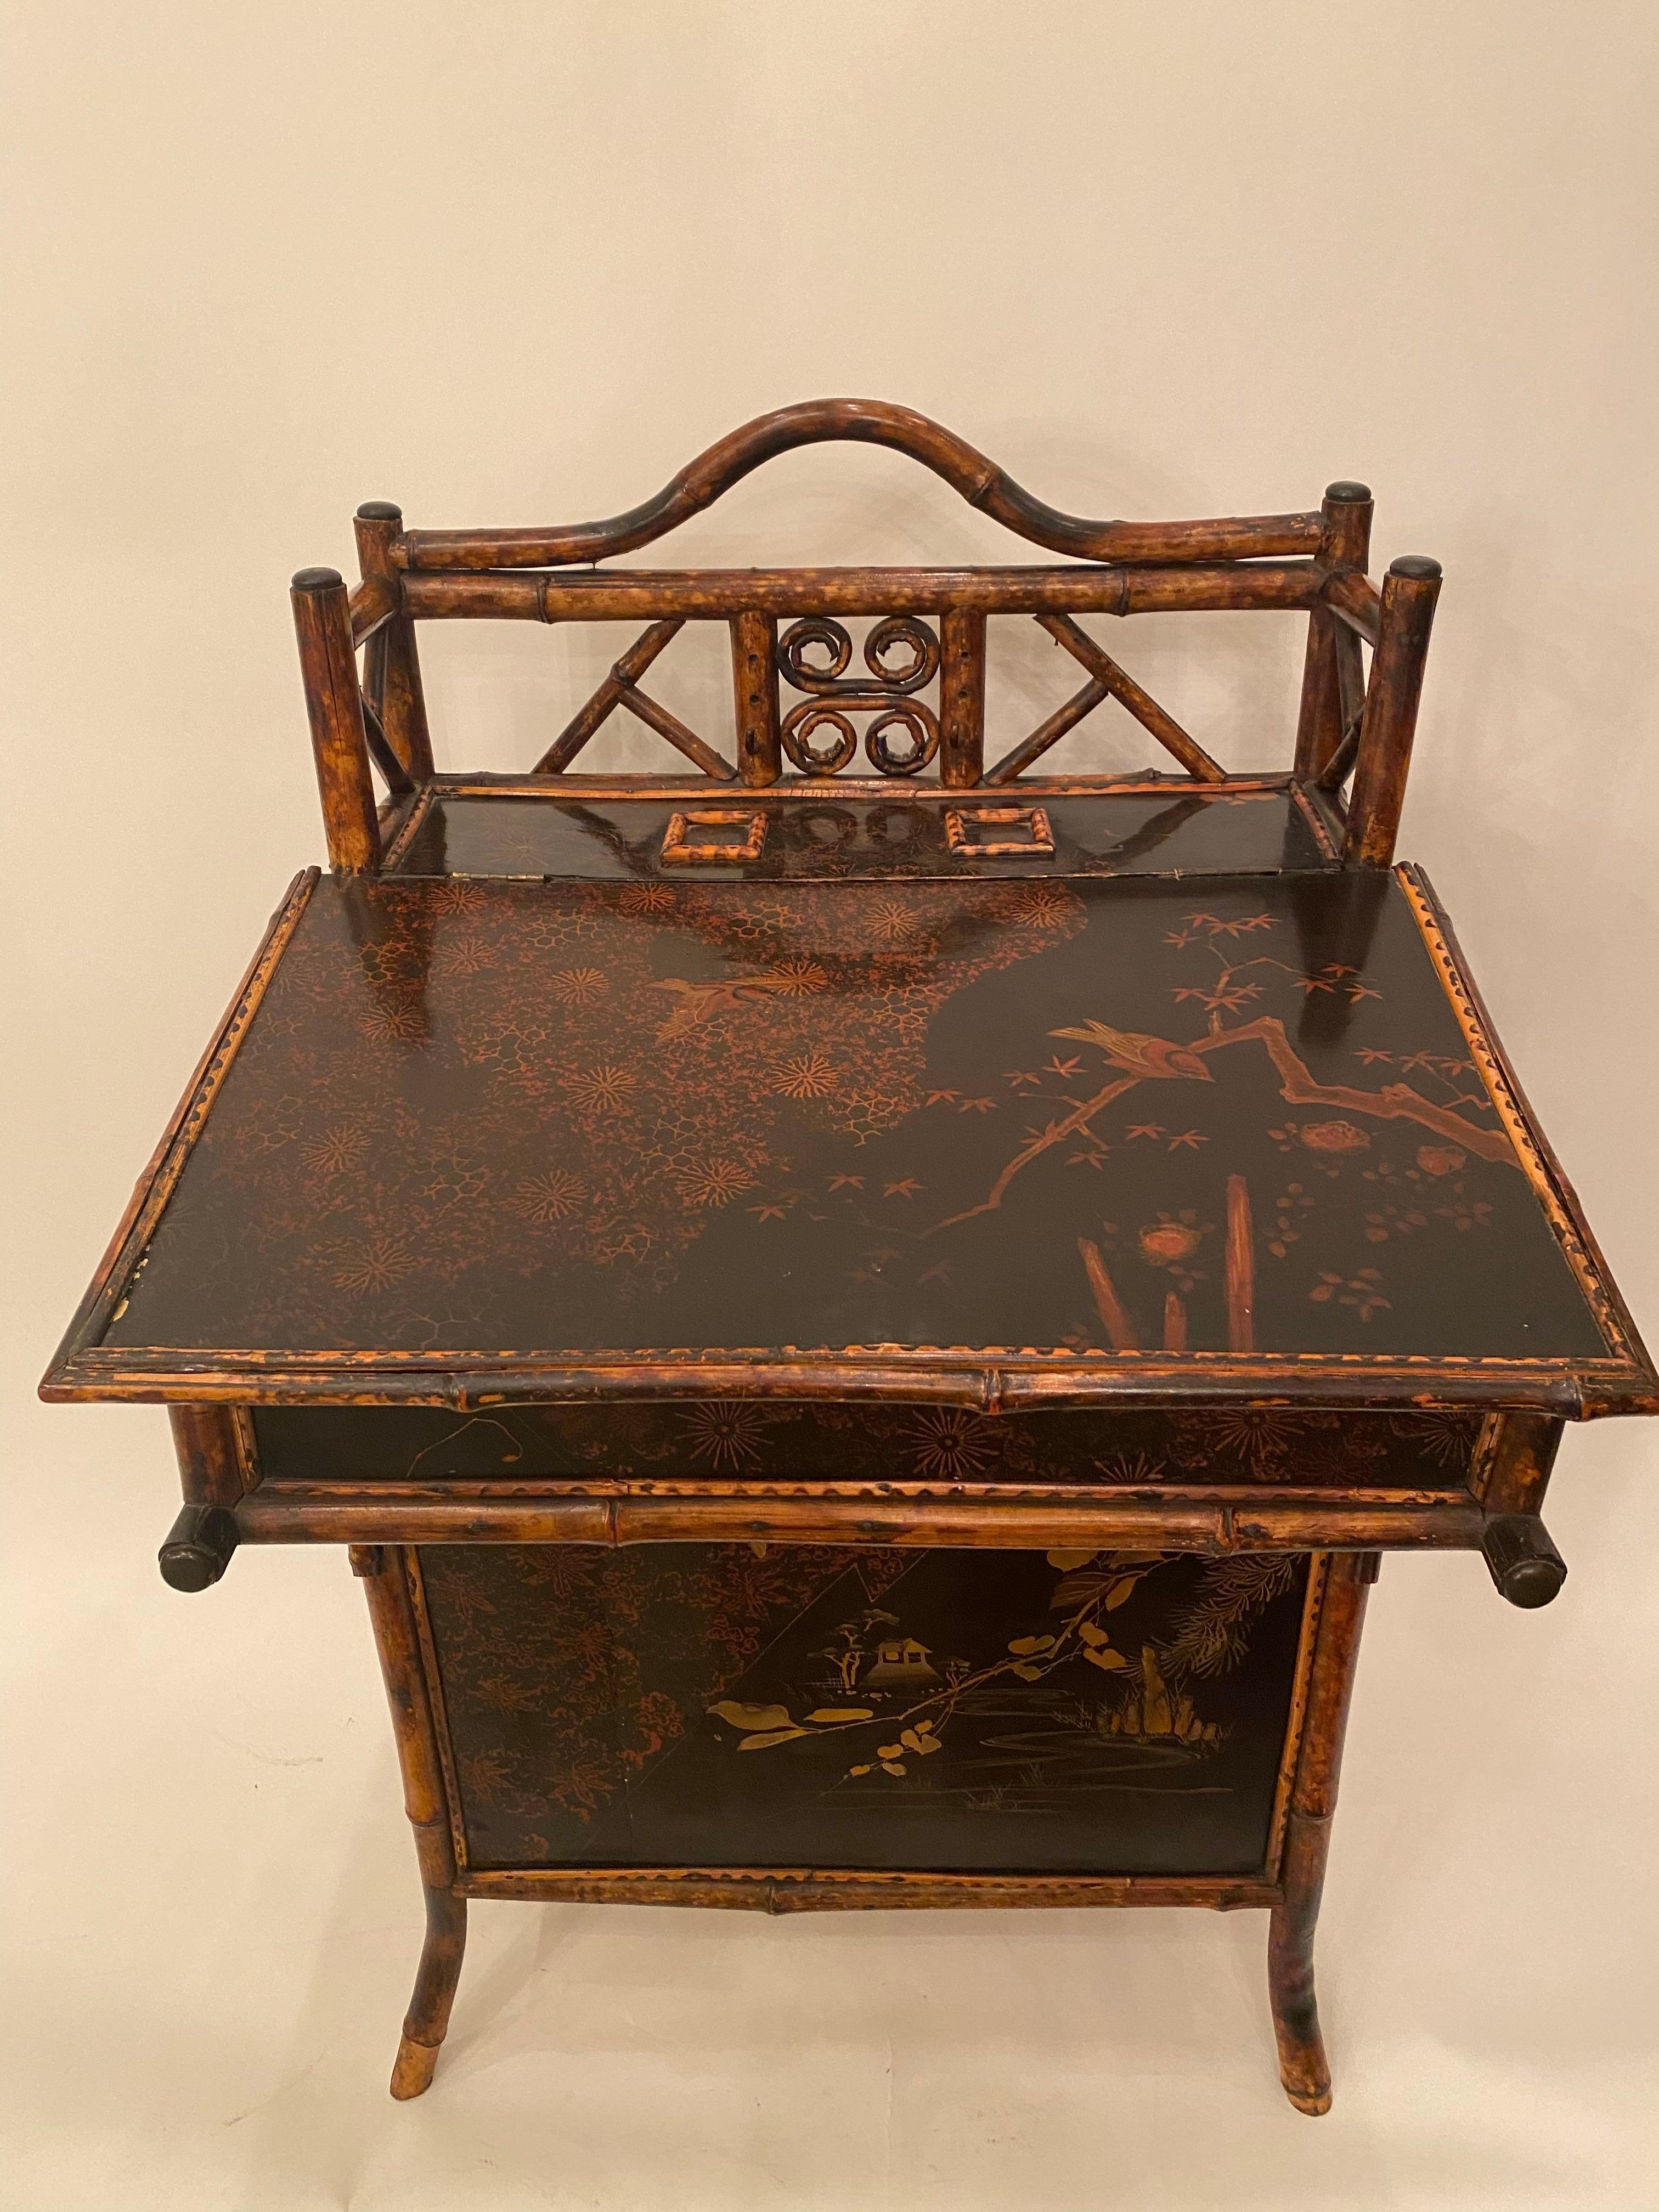 20th Century Late Meiji Period Japanese Export Lacquer Bamboo Desk, circa 1900s